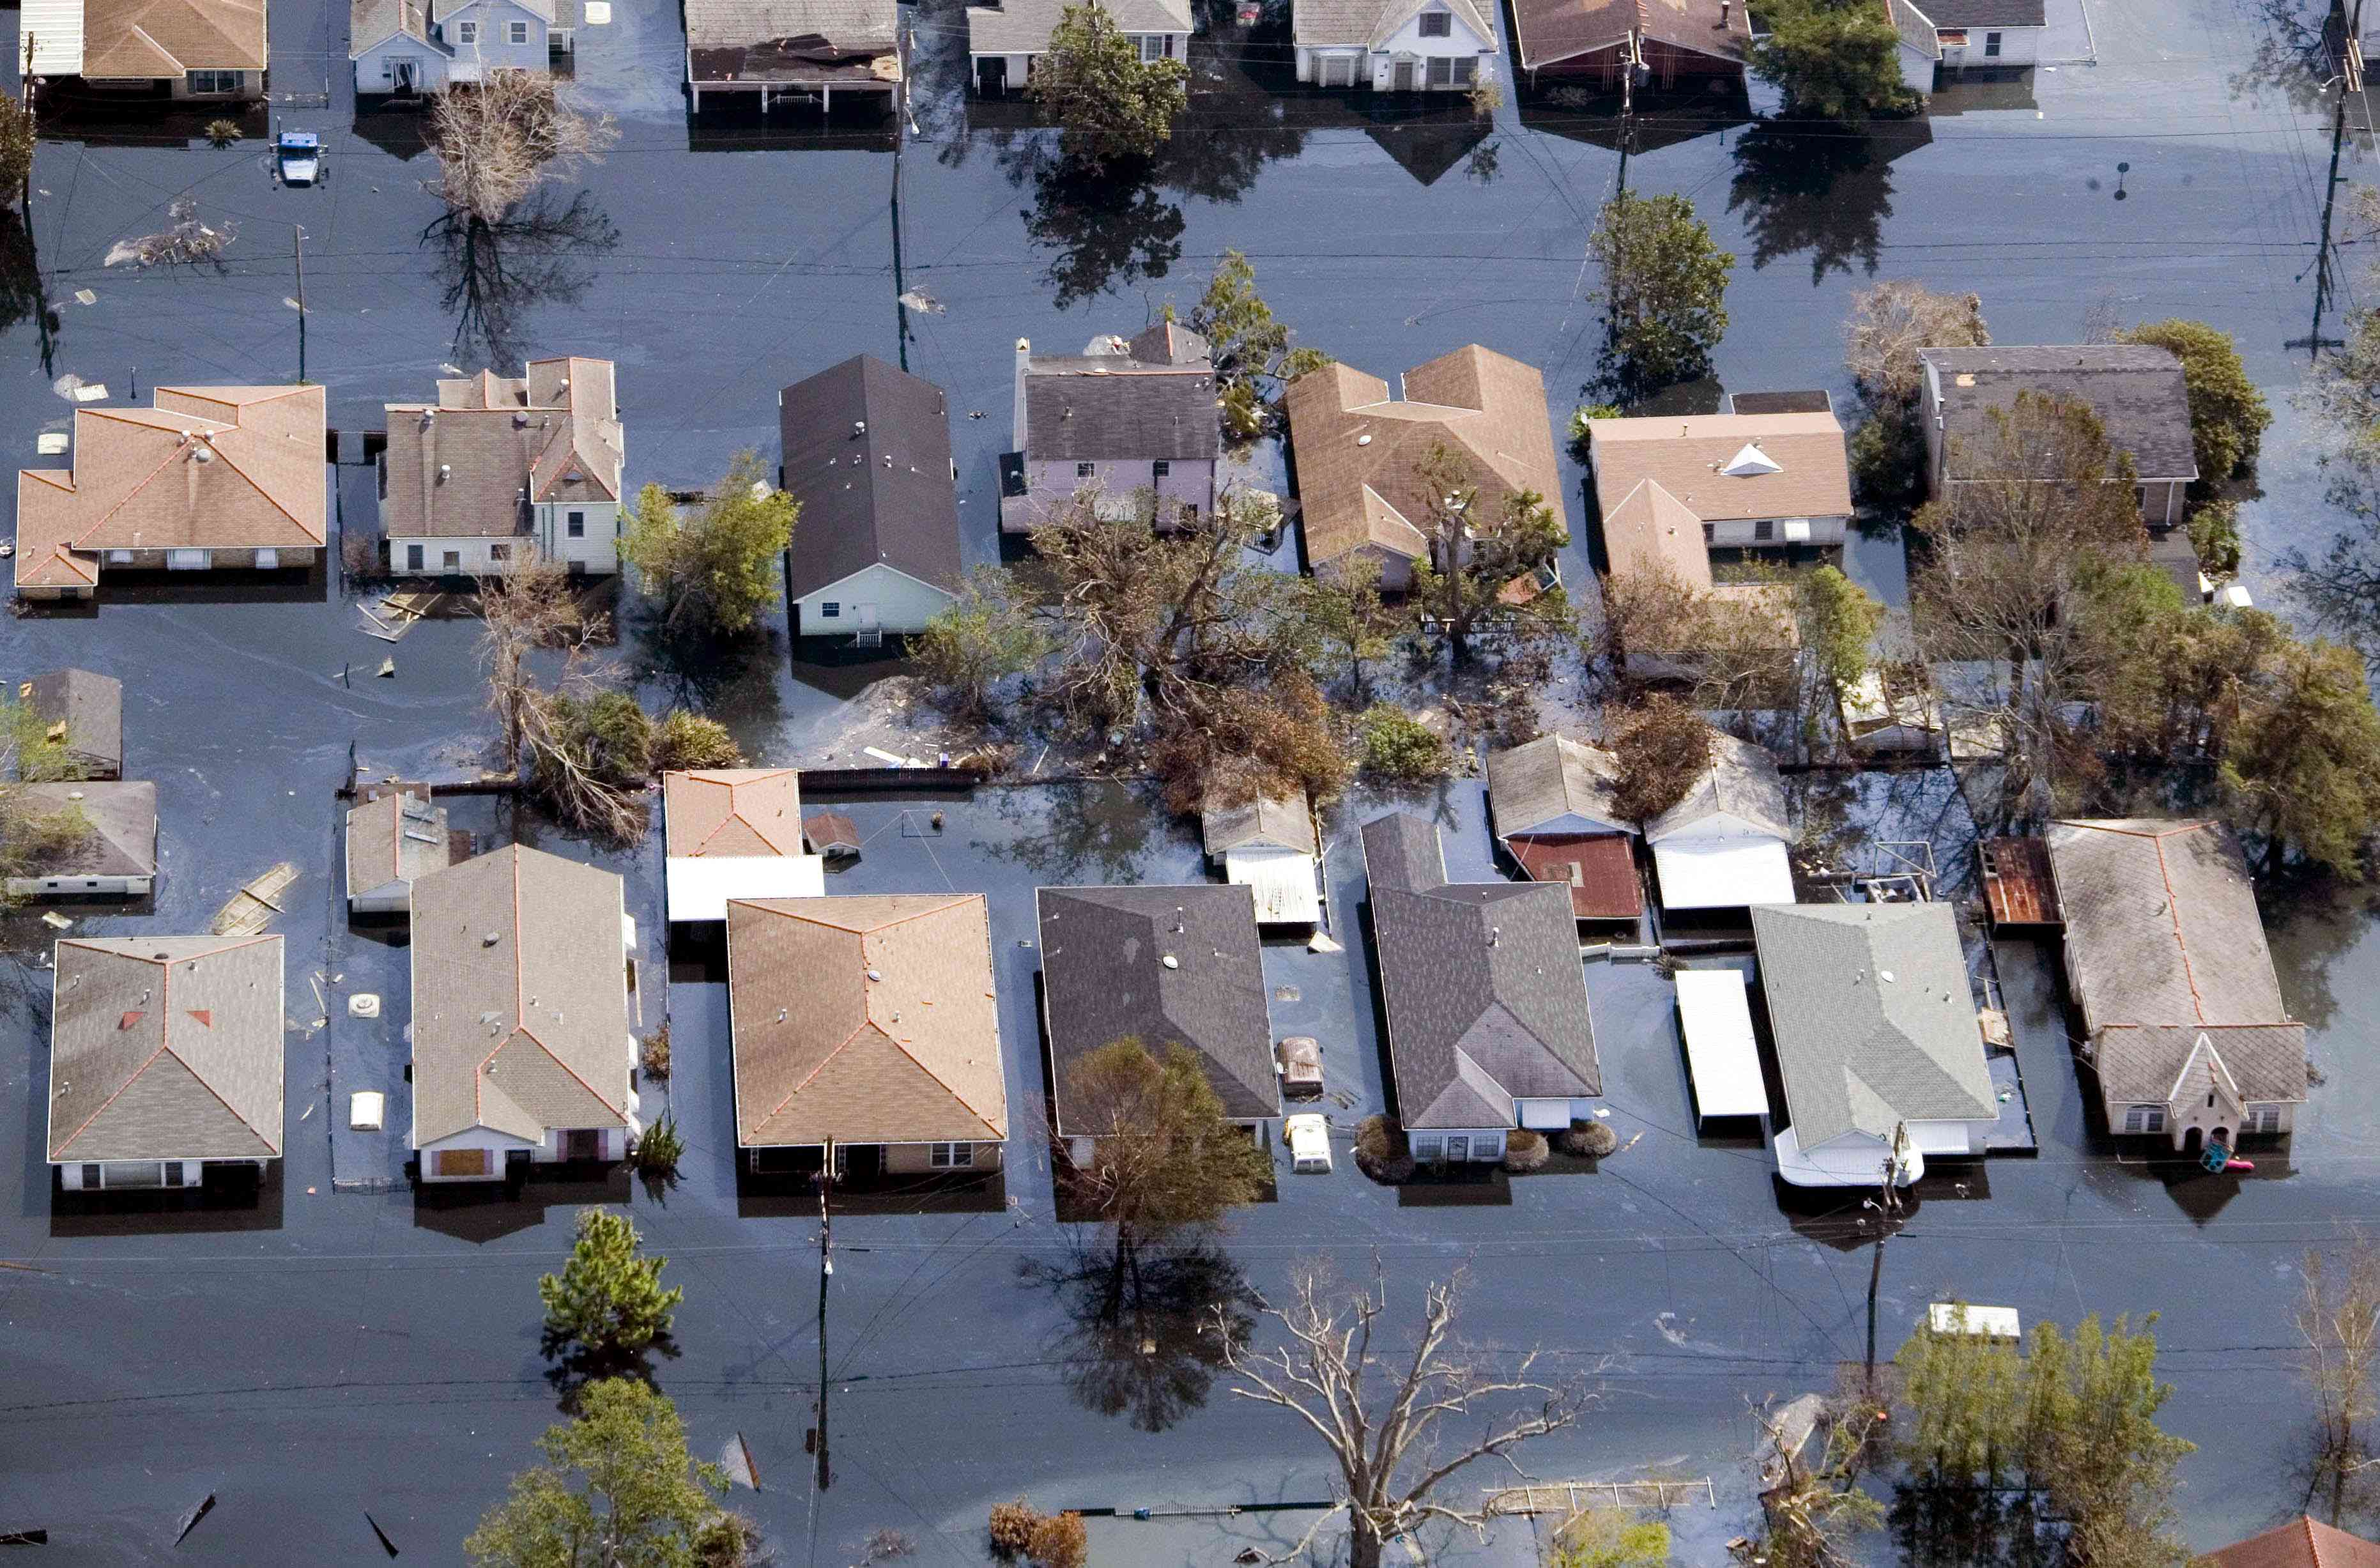 An aerial view of flooded houses in New Orleans after Hurricane Katrina.